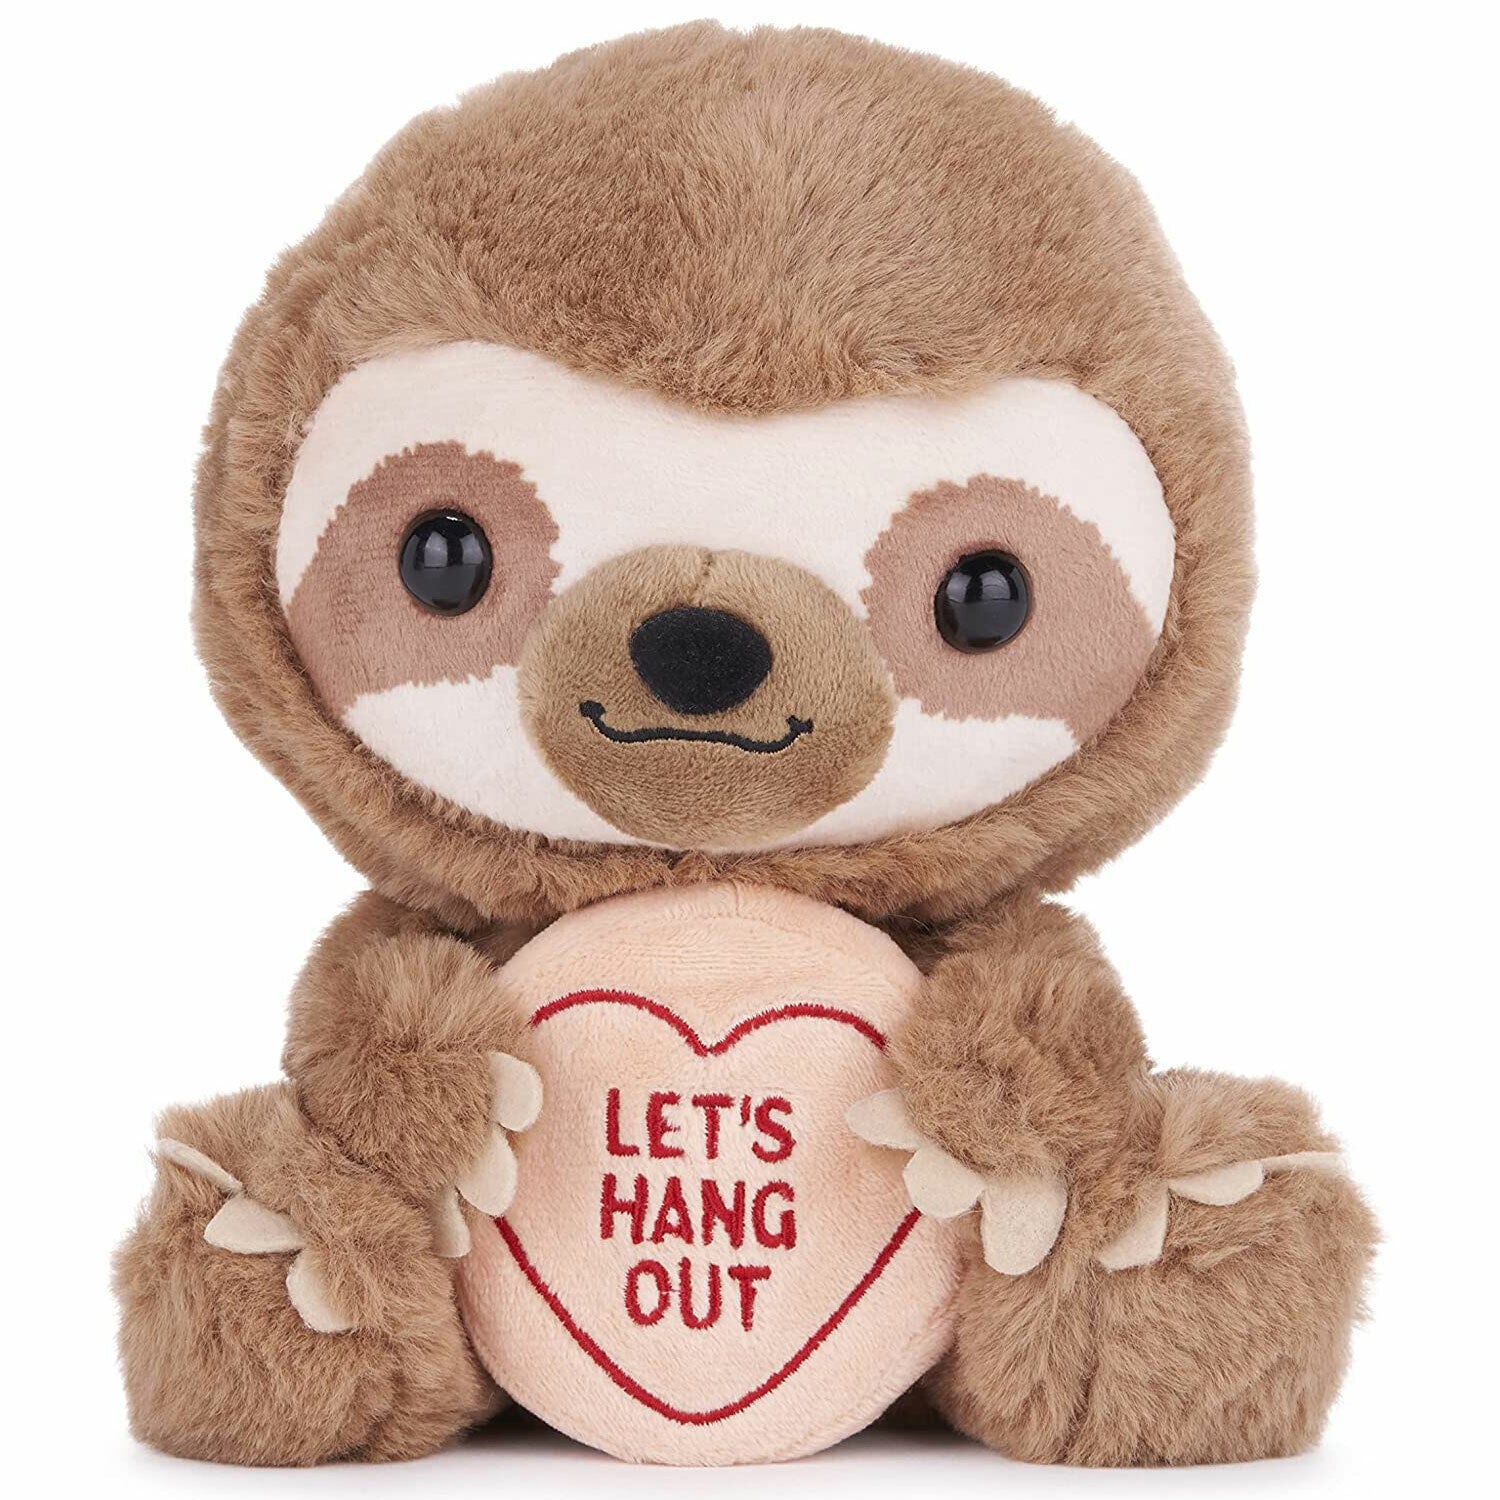 New Swizzels Love Hearts 18cm Plush Steve the Sloth 'Let's Hang Out' Toy